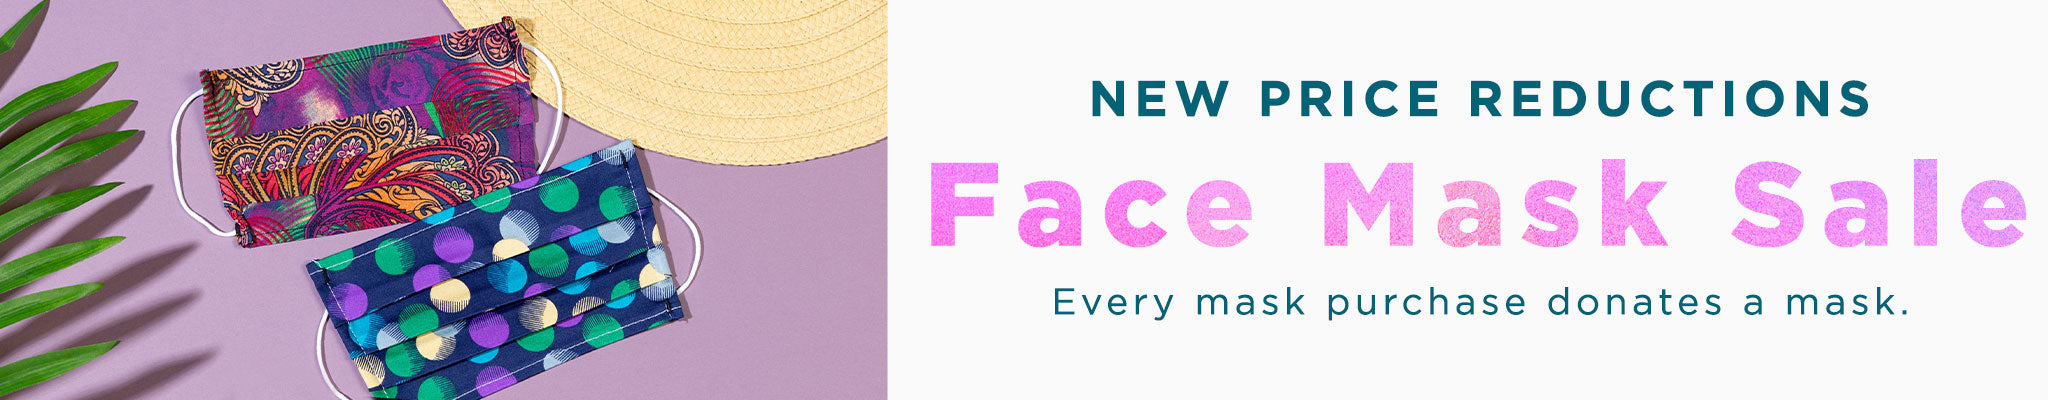 Face Mask Sale | Every mask purchase donates a mask. | New Price Reductions